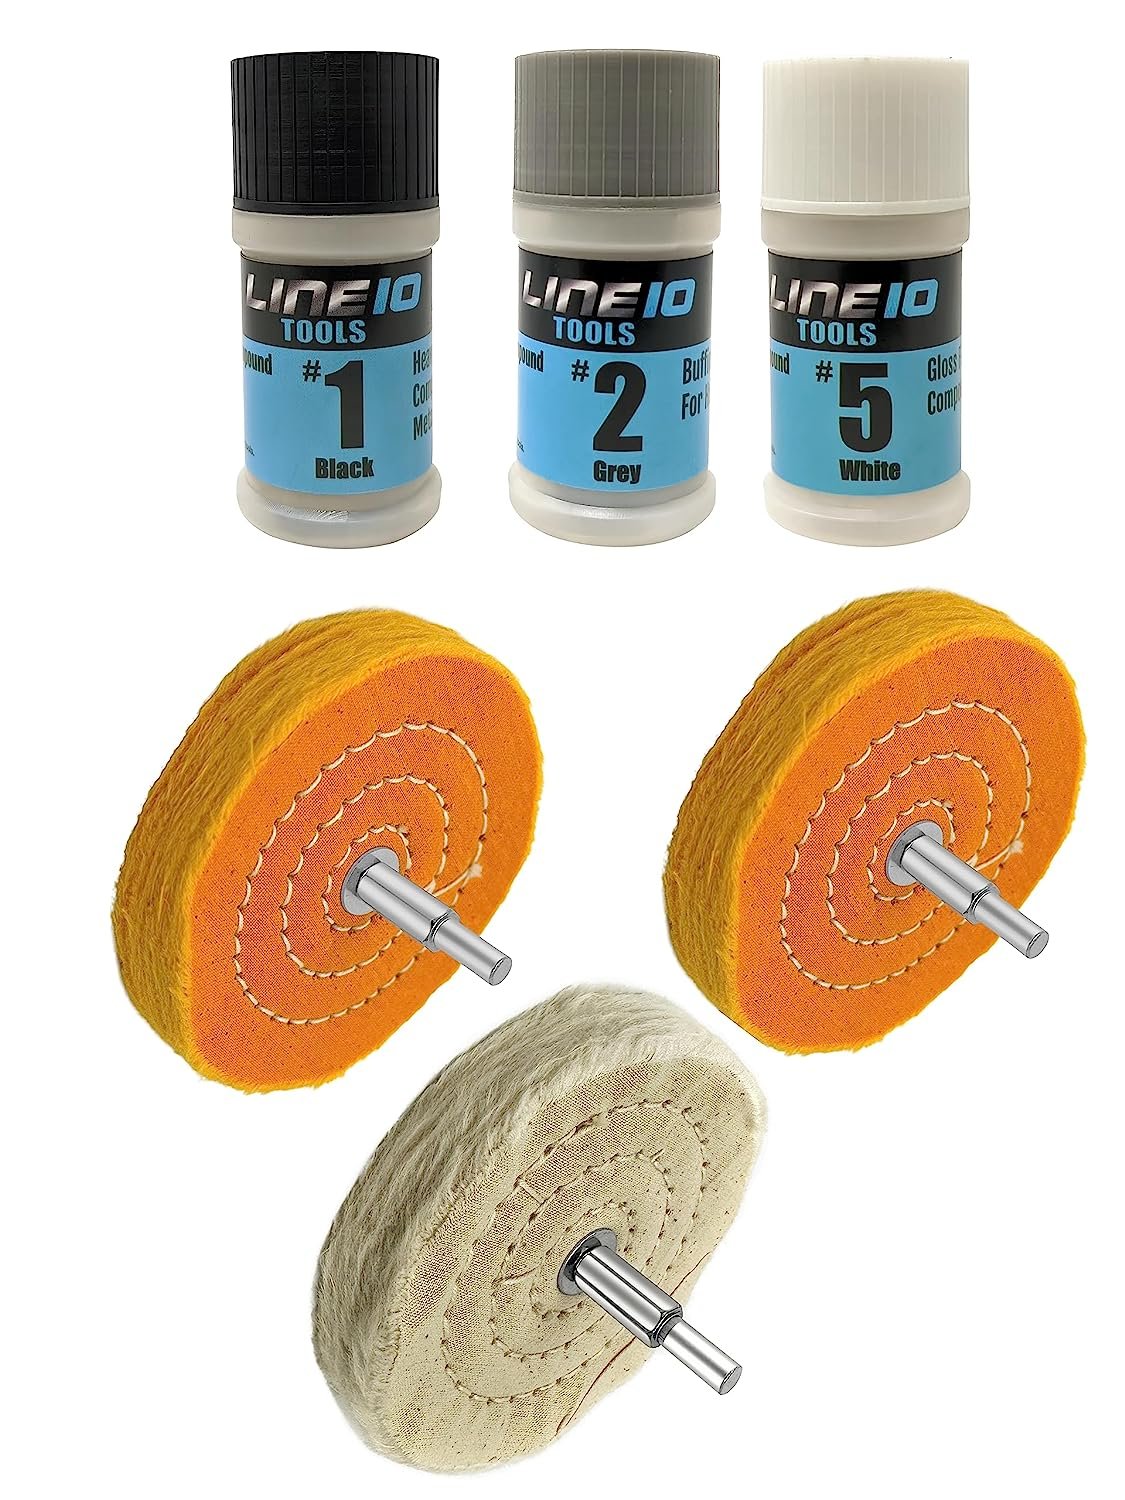 Metal Buffing Wheel Kit for Drill, with 3 Step Polishing Compound